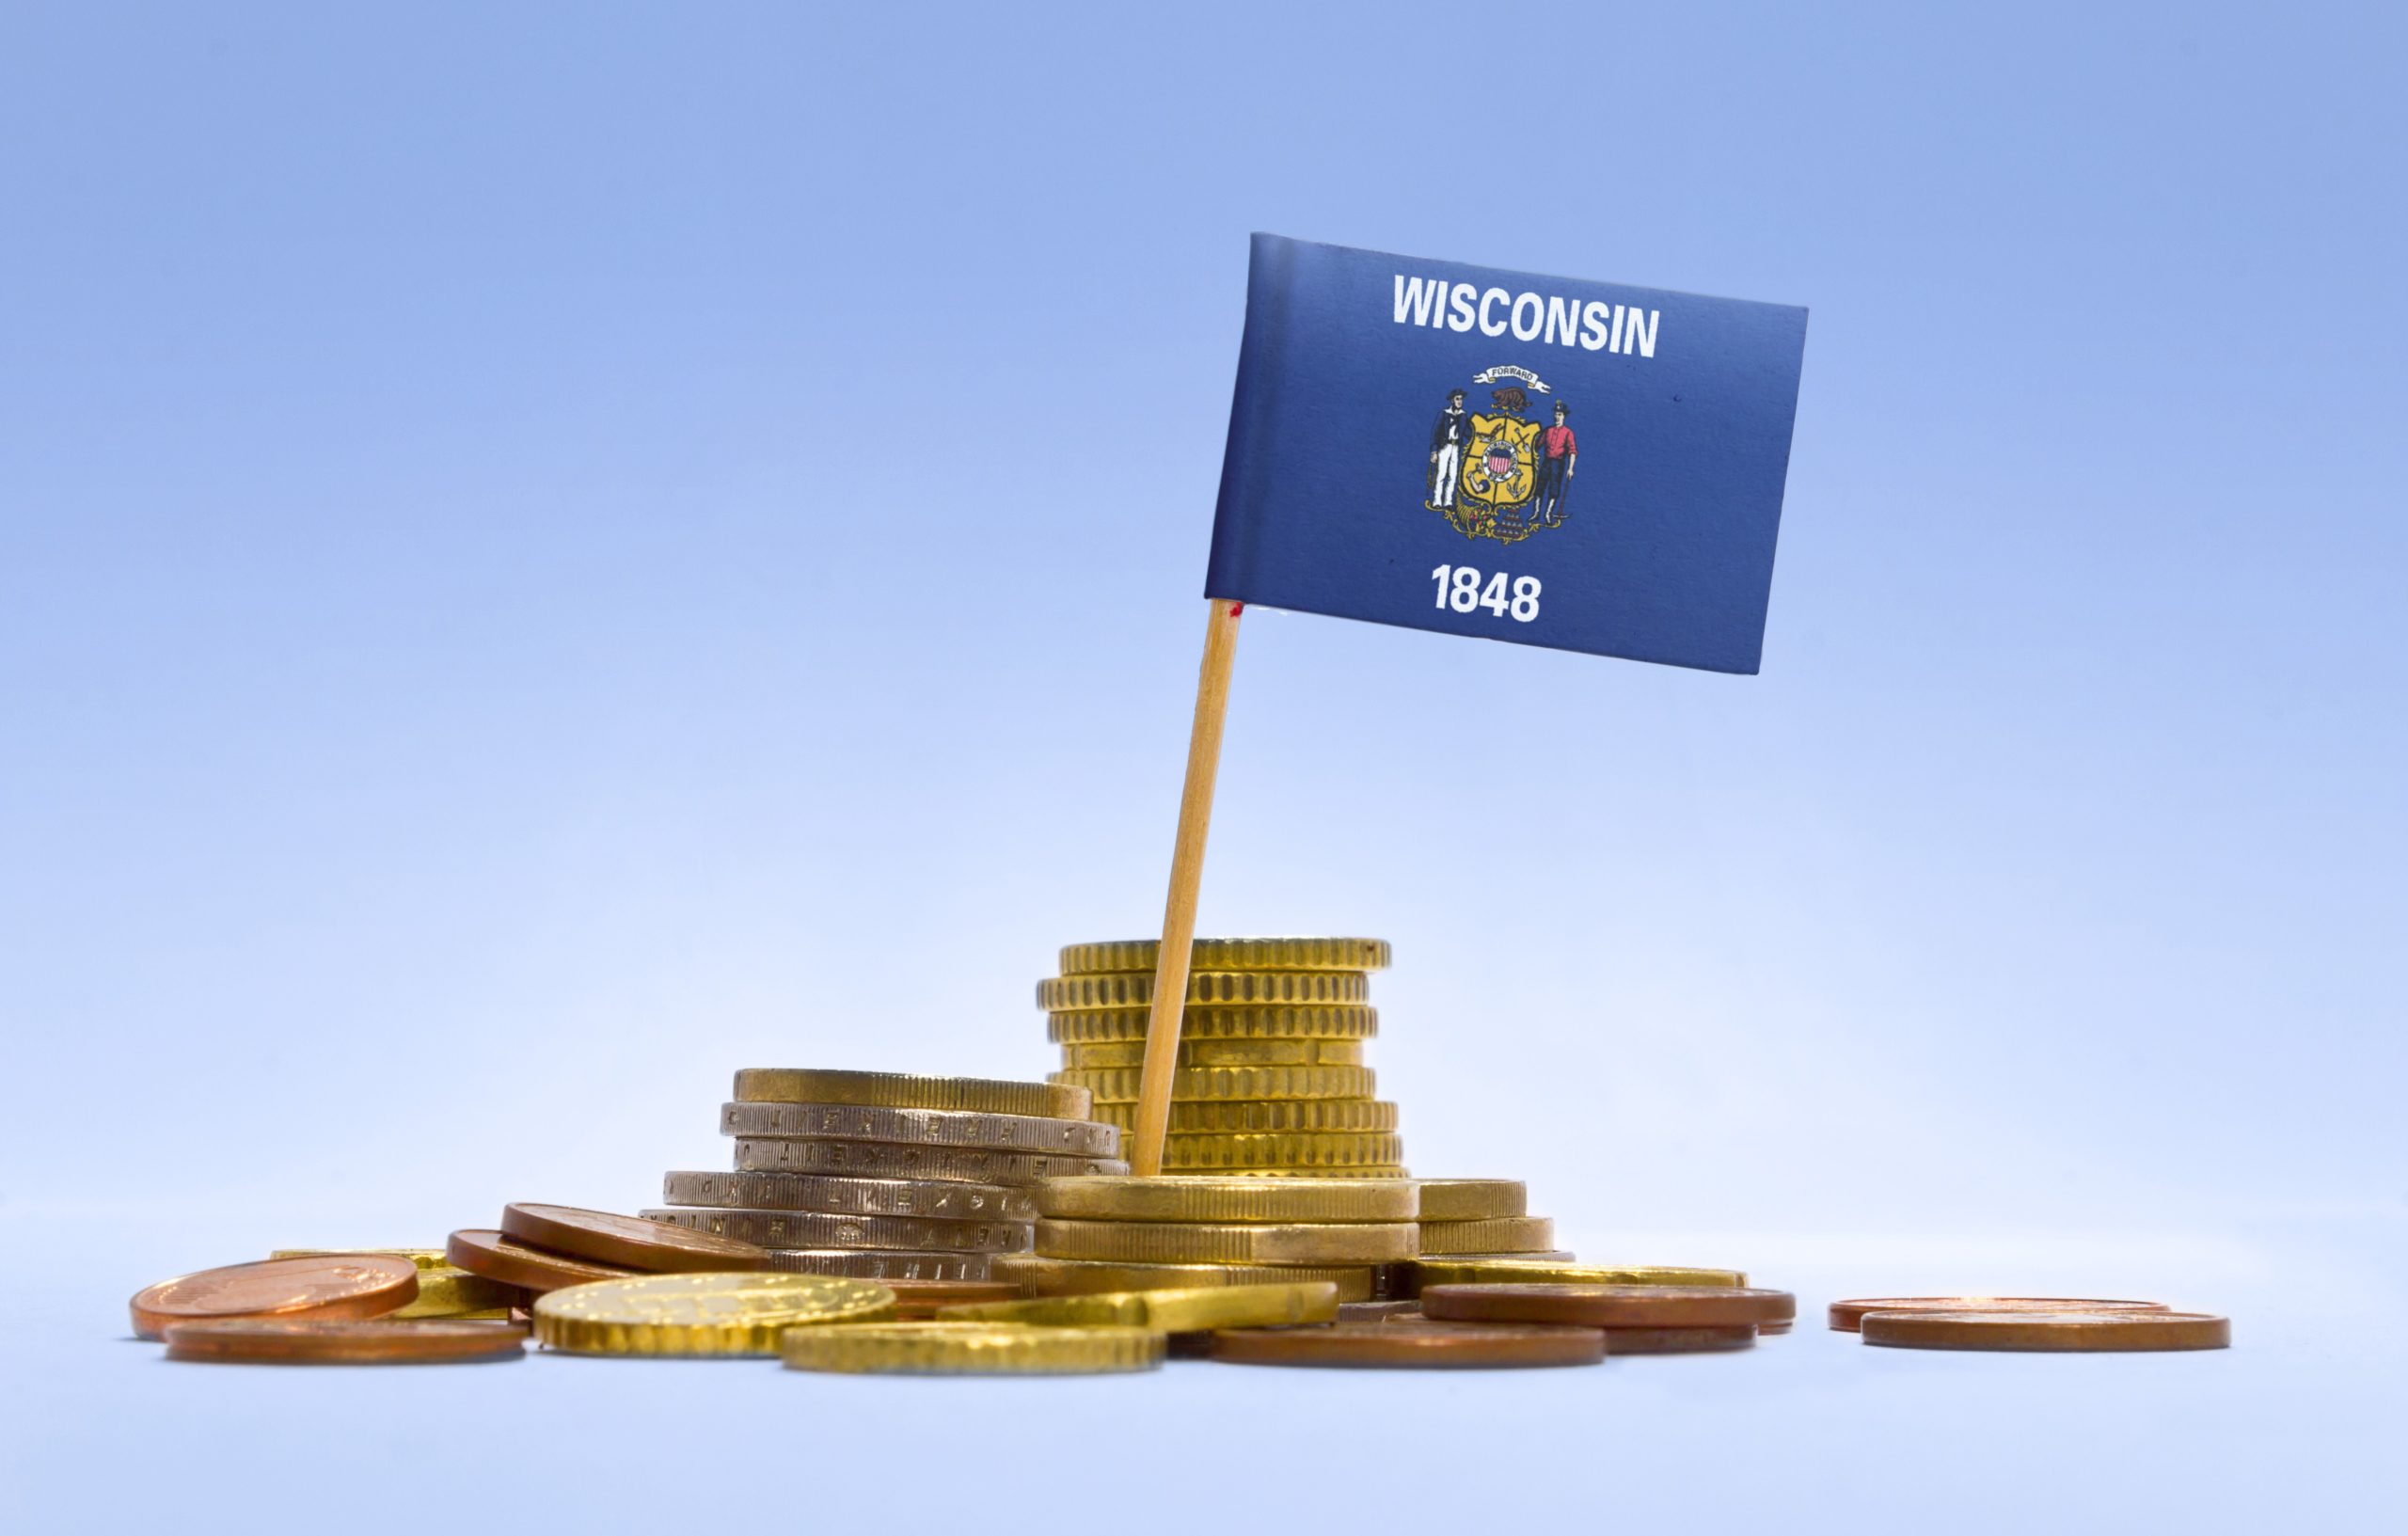 WISCONSIN JOINS IRS RE PPP LOAN EXPENSE DEDUCTION